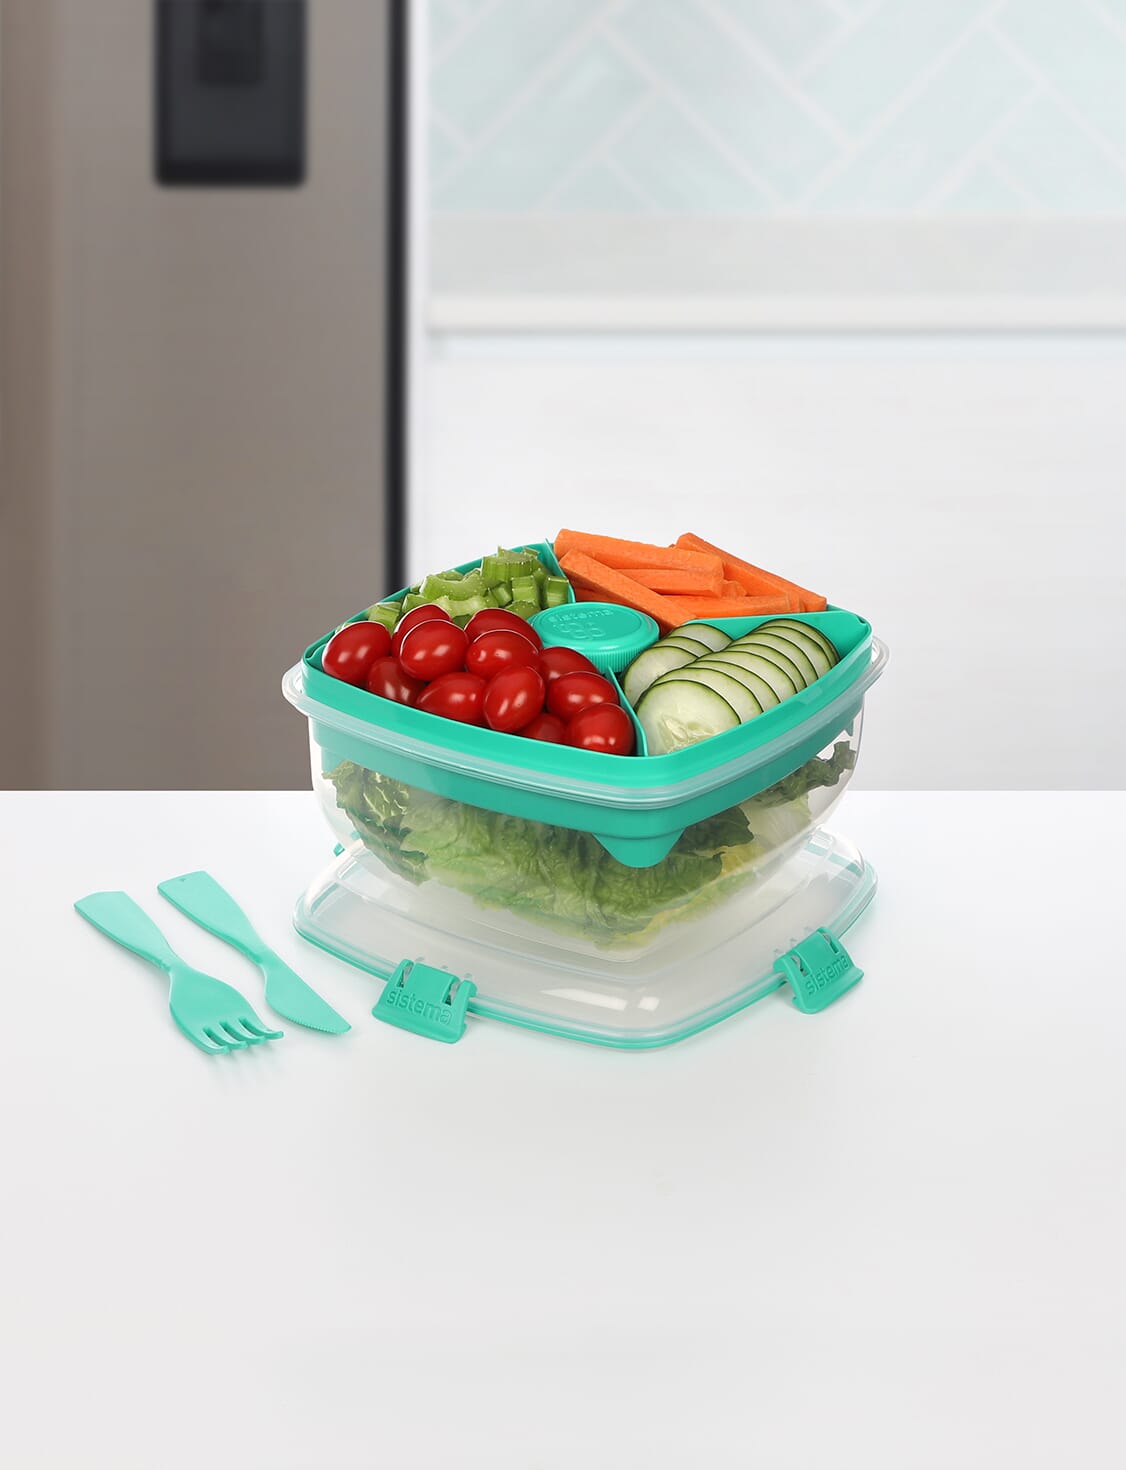 Sistema To Go, 1.65L/6.9 Cups, 1 Pack, Plastic Rectangular Bento Lunch with  Yogurt Pot, Teal